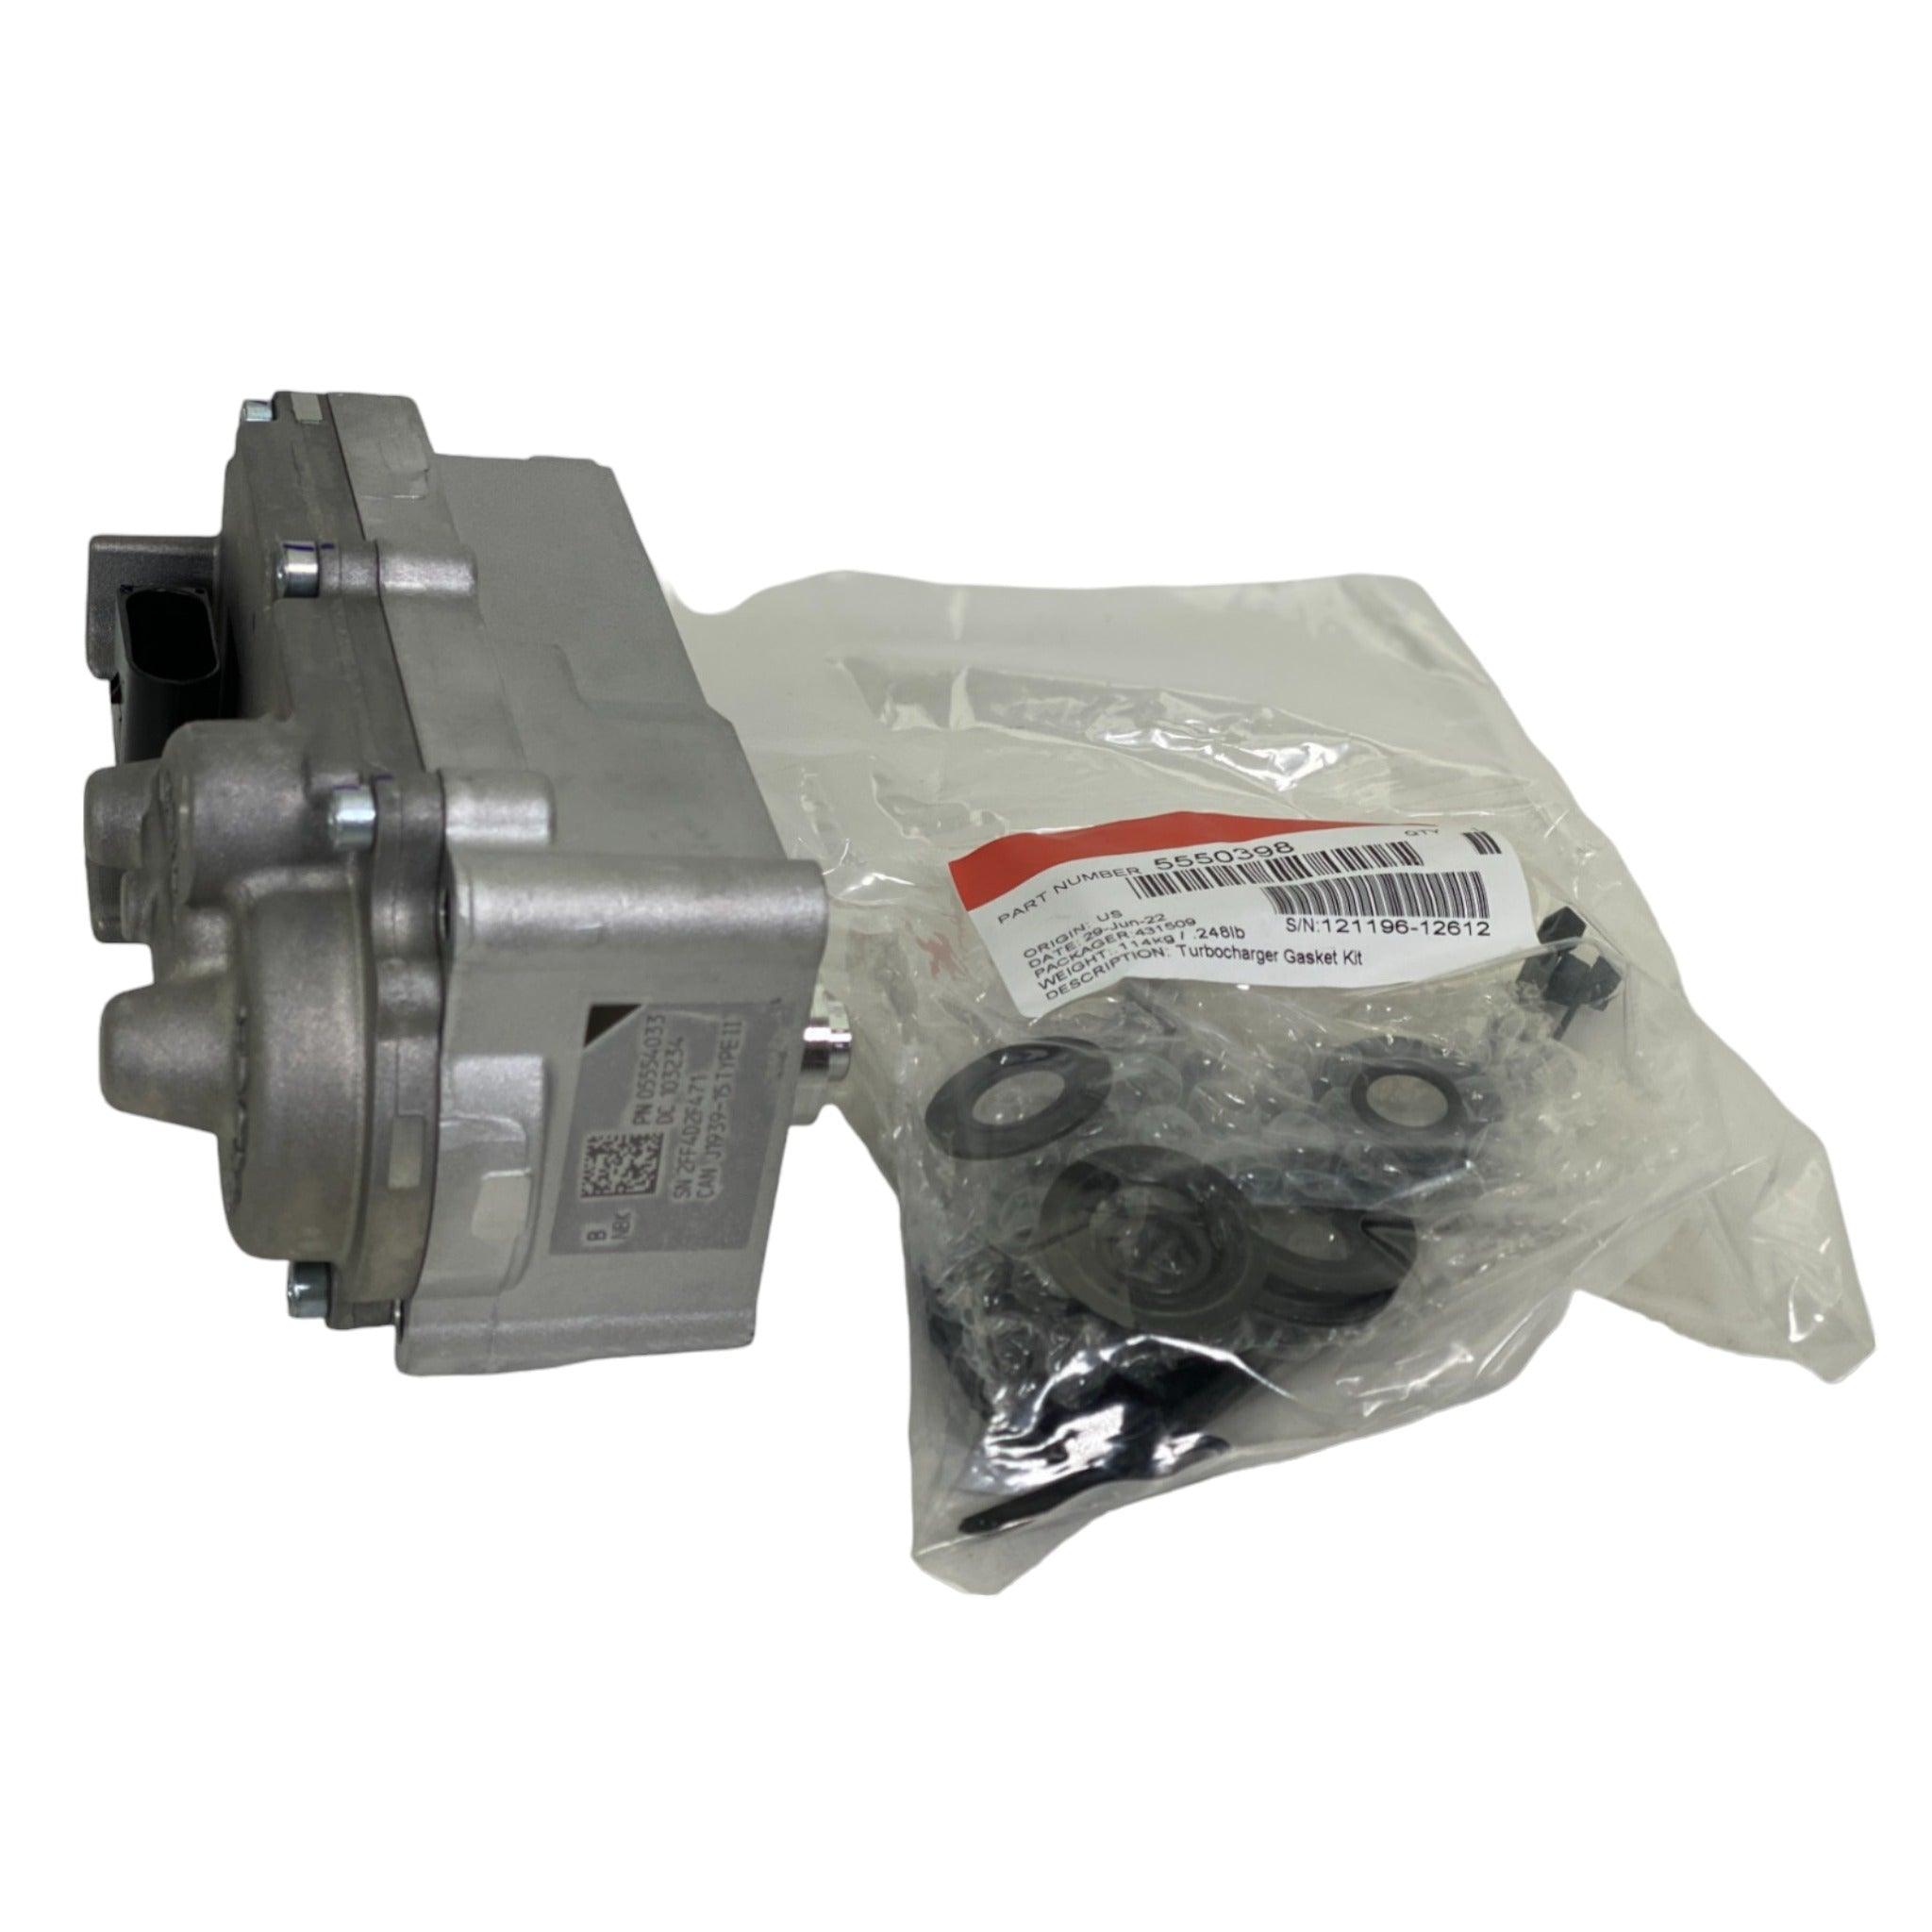 5603776Rx Genuine Cummins Turbo Electronic Actuator For Isc - ADVANCED TRUCK PARTS